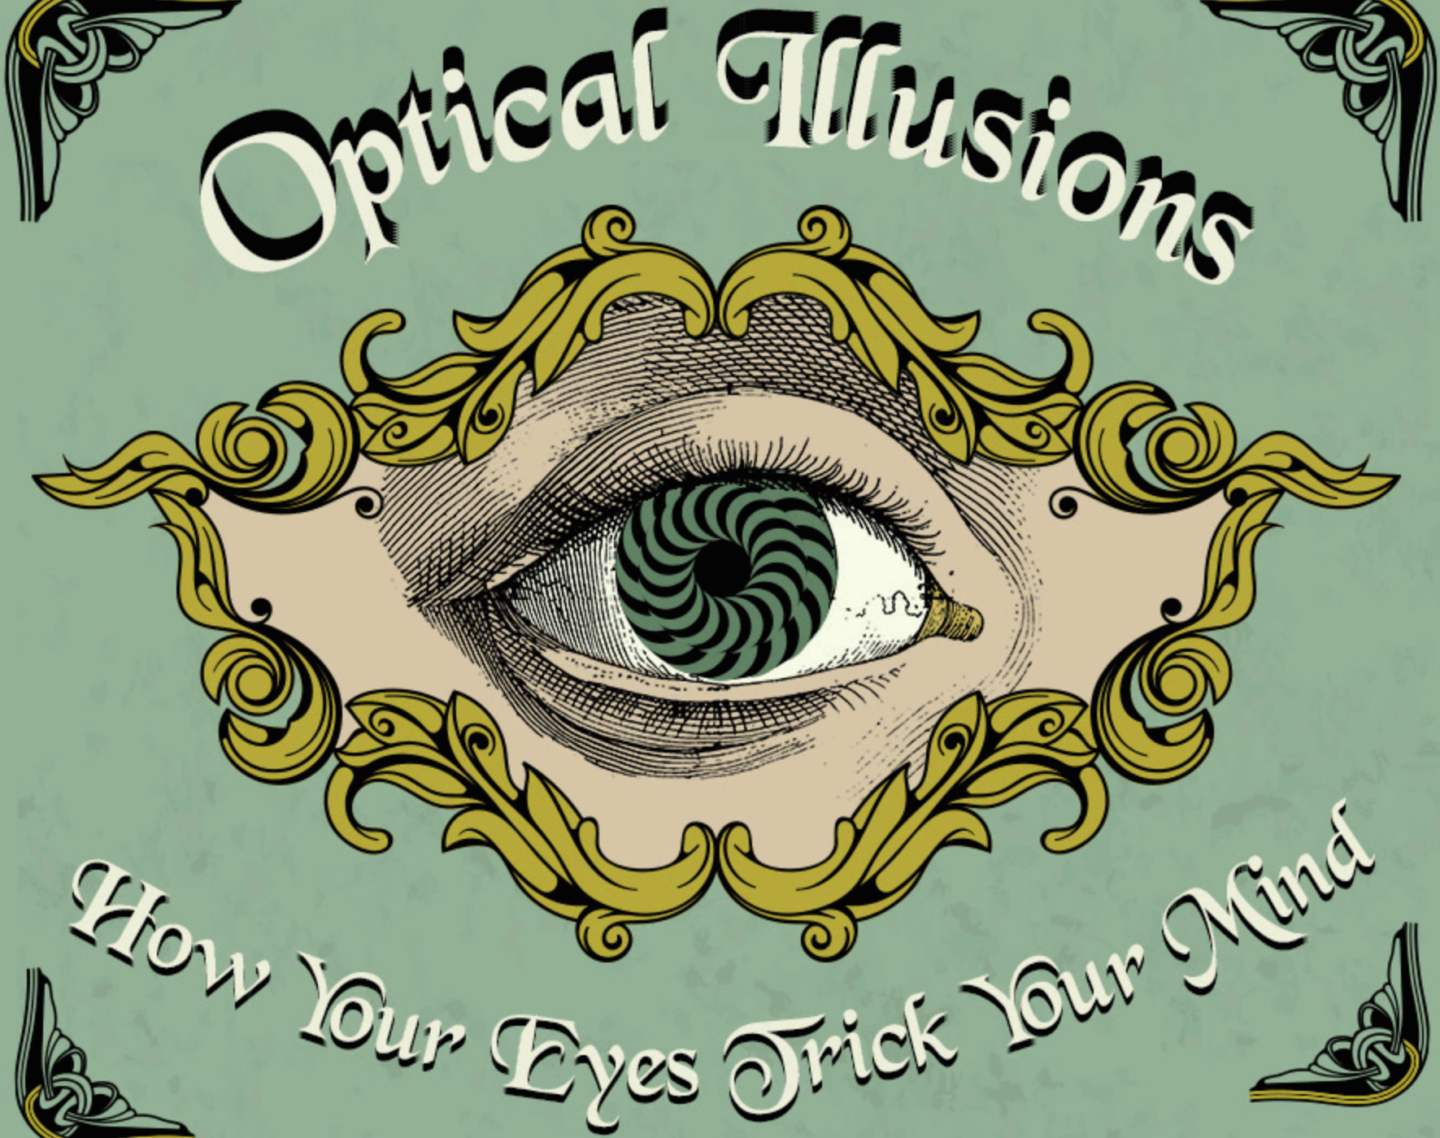 Animated “Gifographic” of Classic Optical Illusions